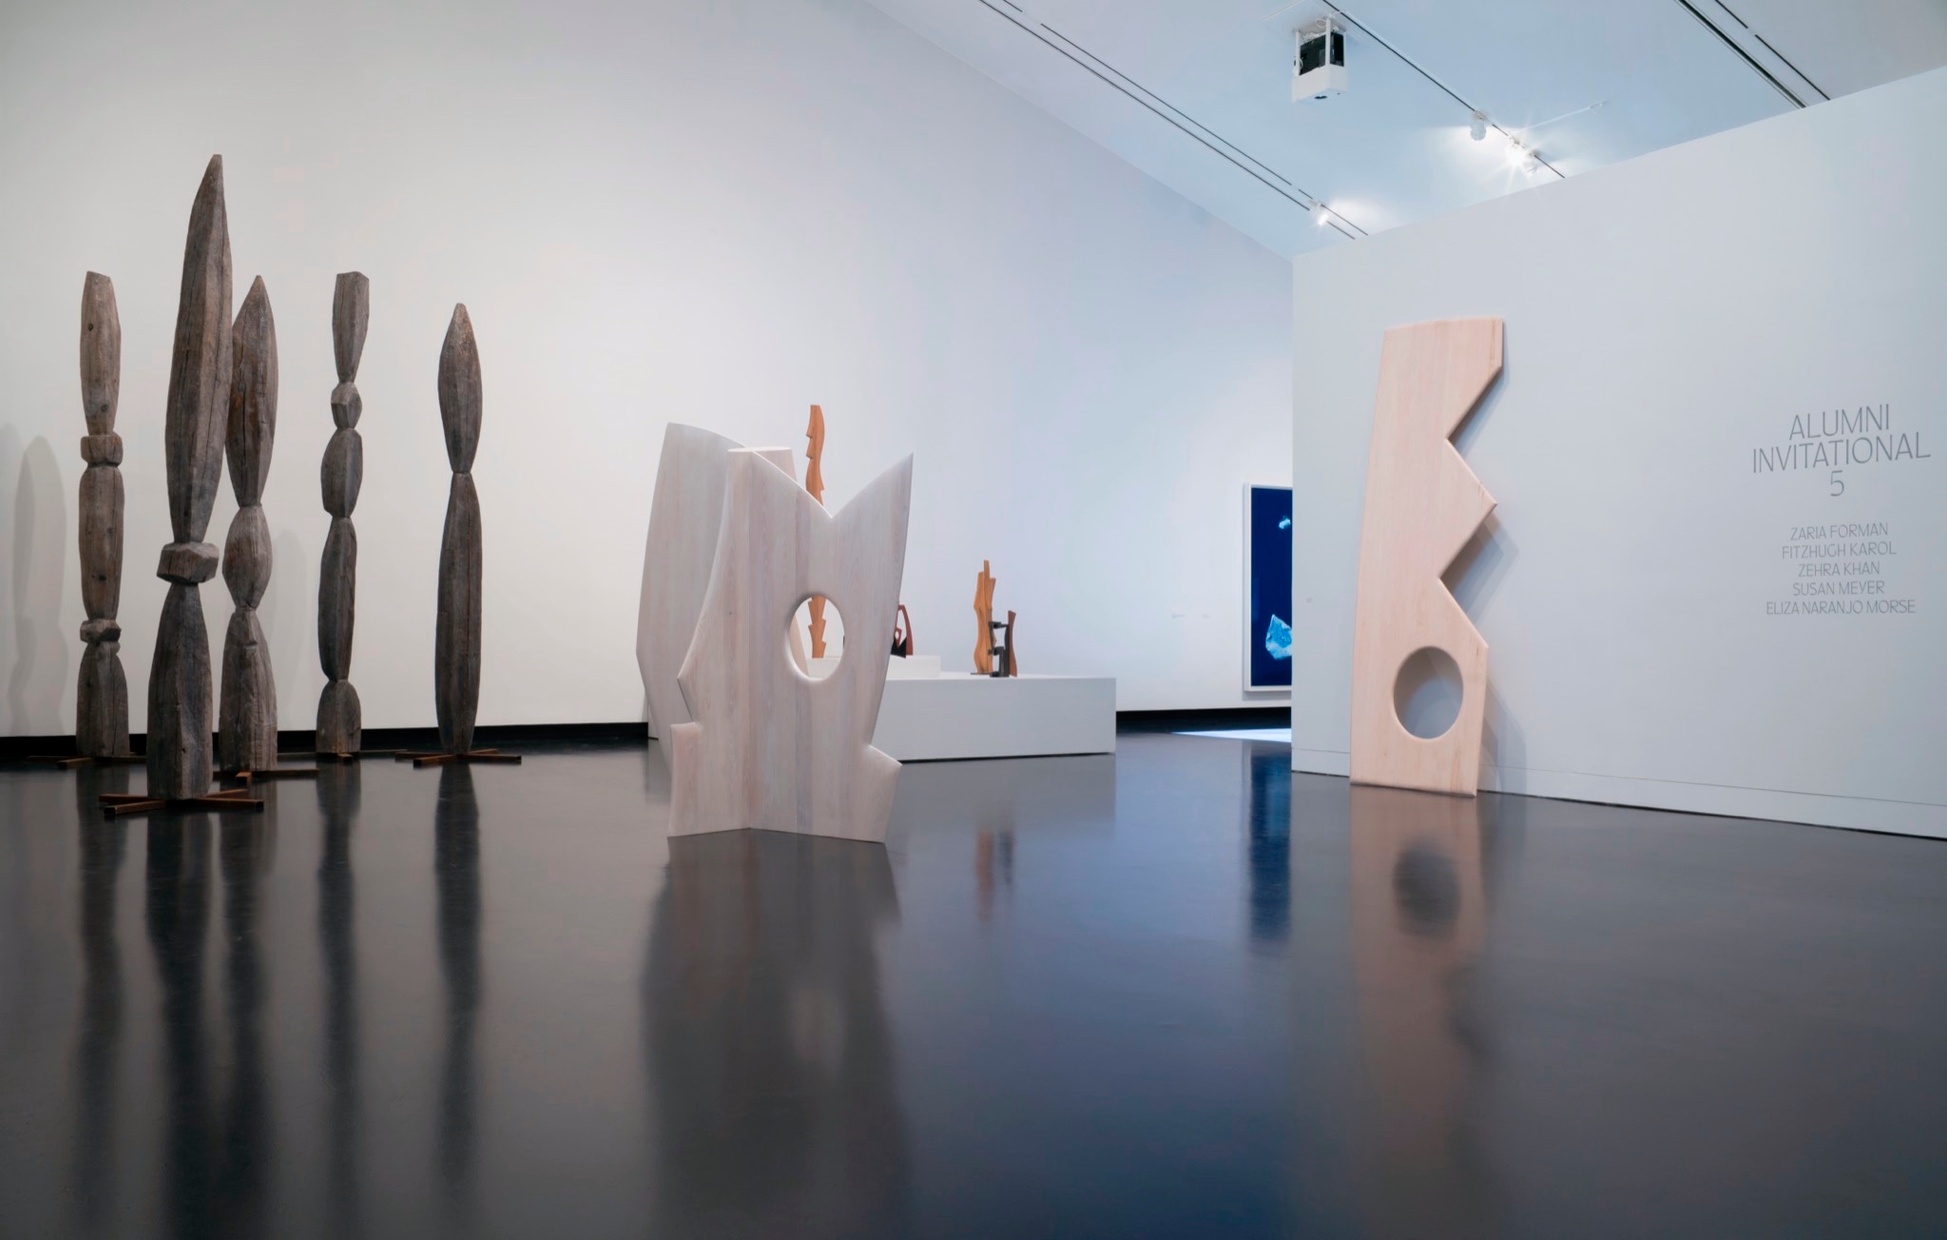 In a museum gallery with white walls and a black floor stand many geometric wooden sculptures.